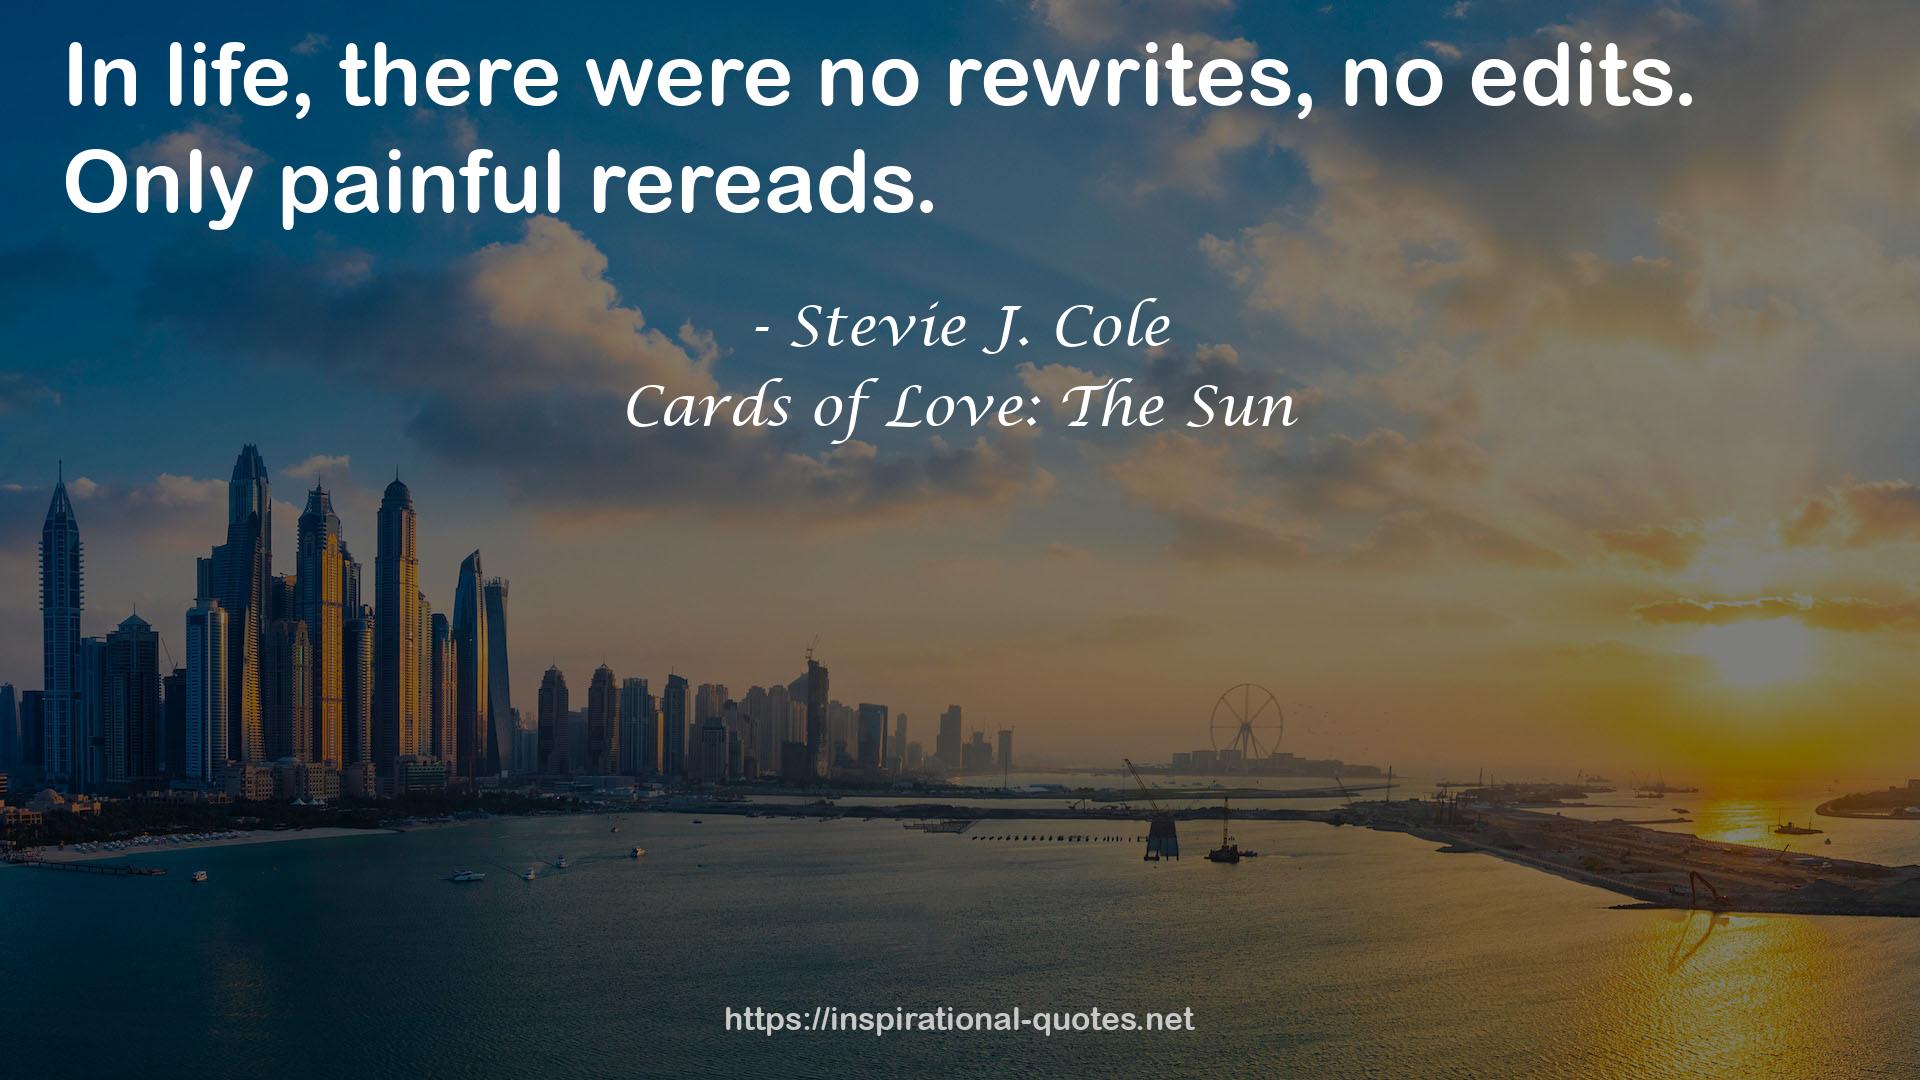 Cards of Love: The Sun QUOTES